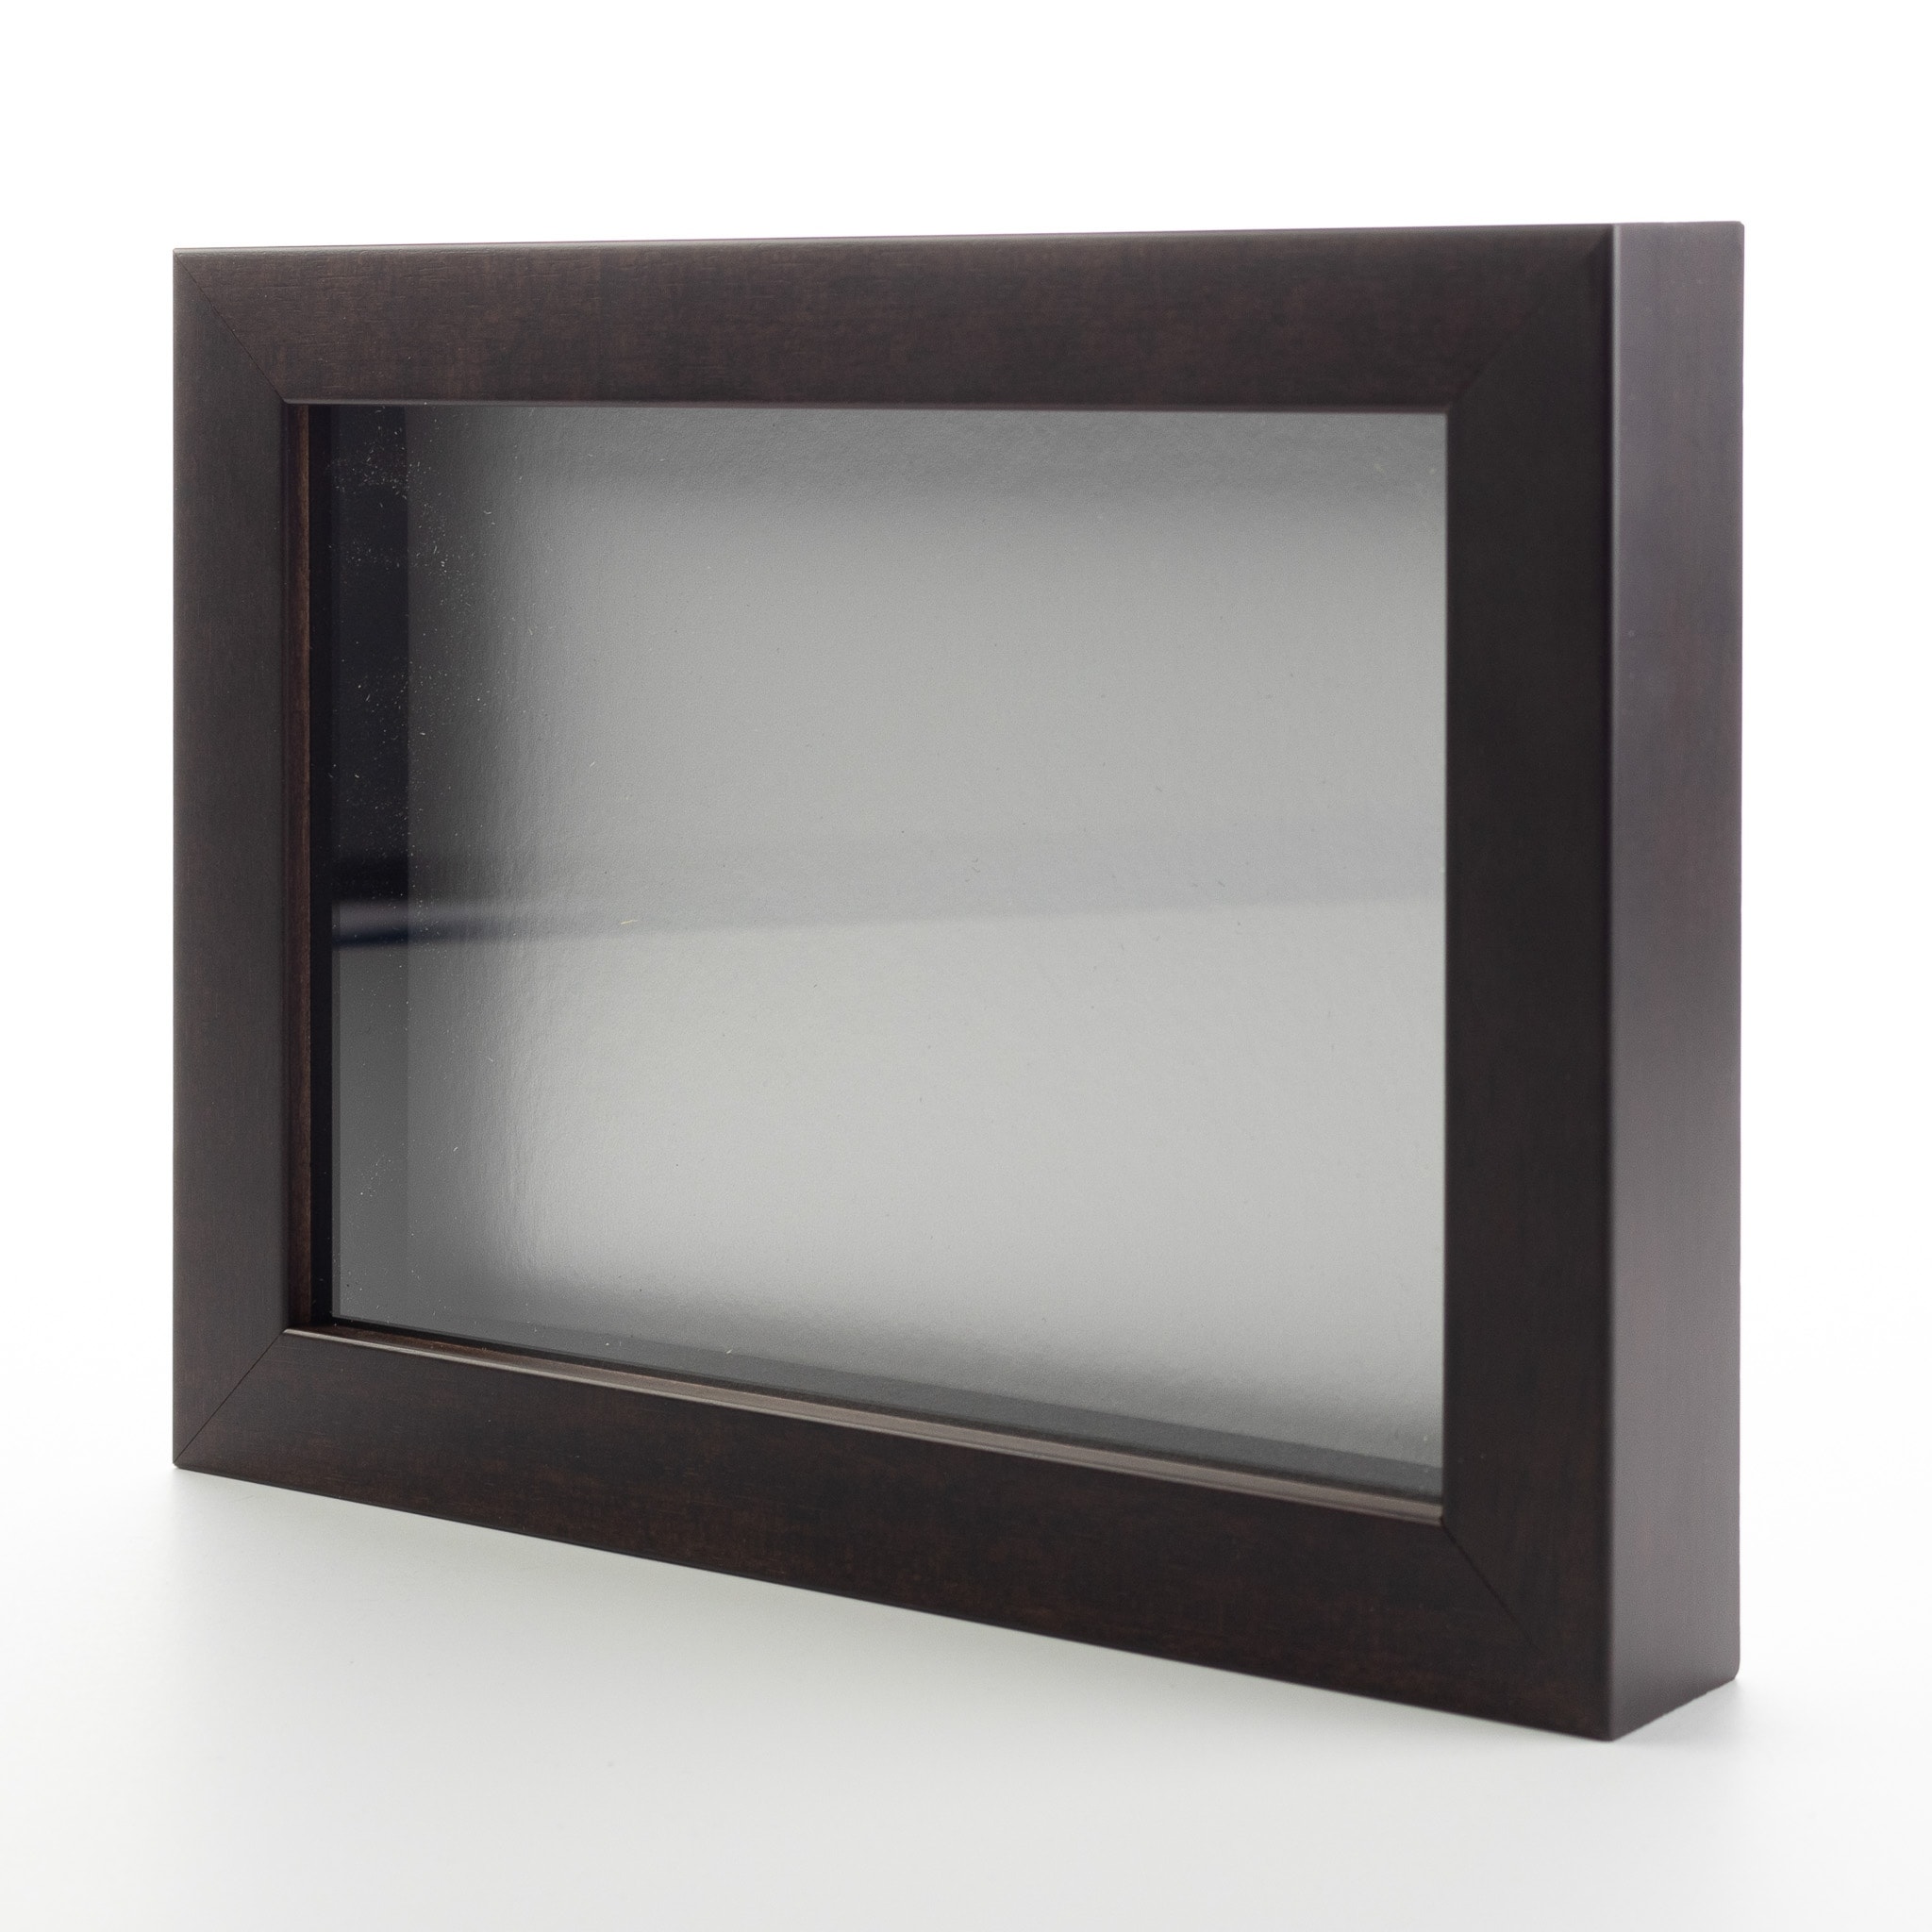 8x8 Shadow Box Frame Light Real Wood with a Silver Acid-Free Backing, 3/4  of Usuable Depth